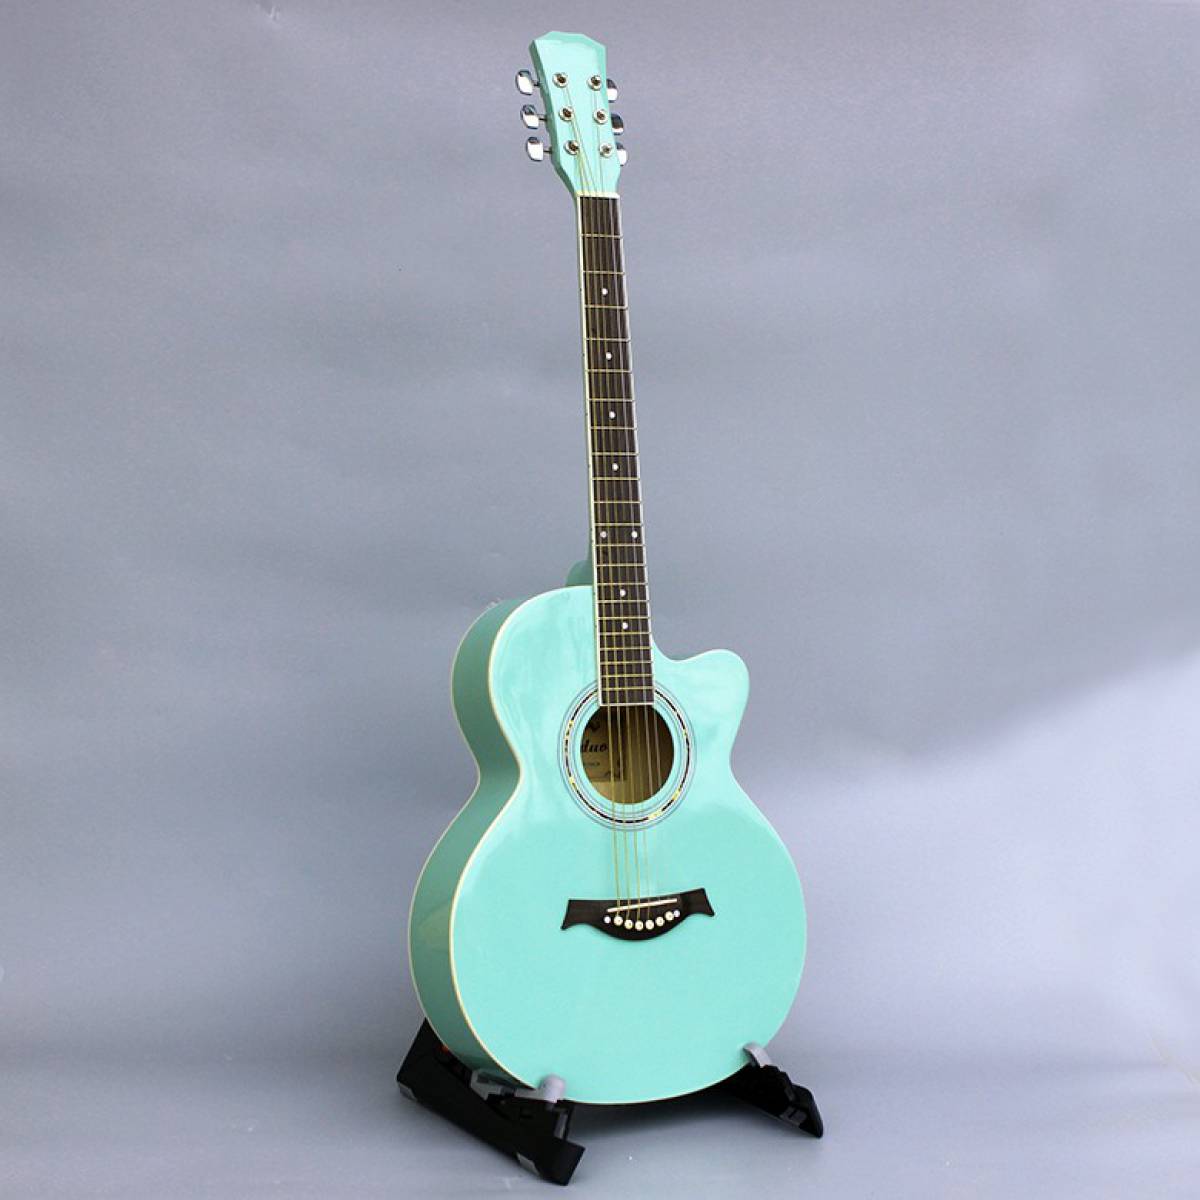 39 inch basswood acoustic guitar in gloss